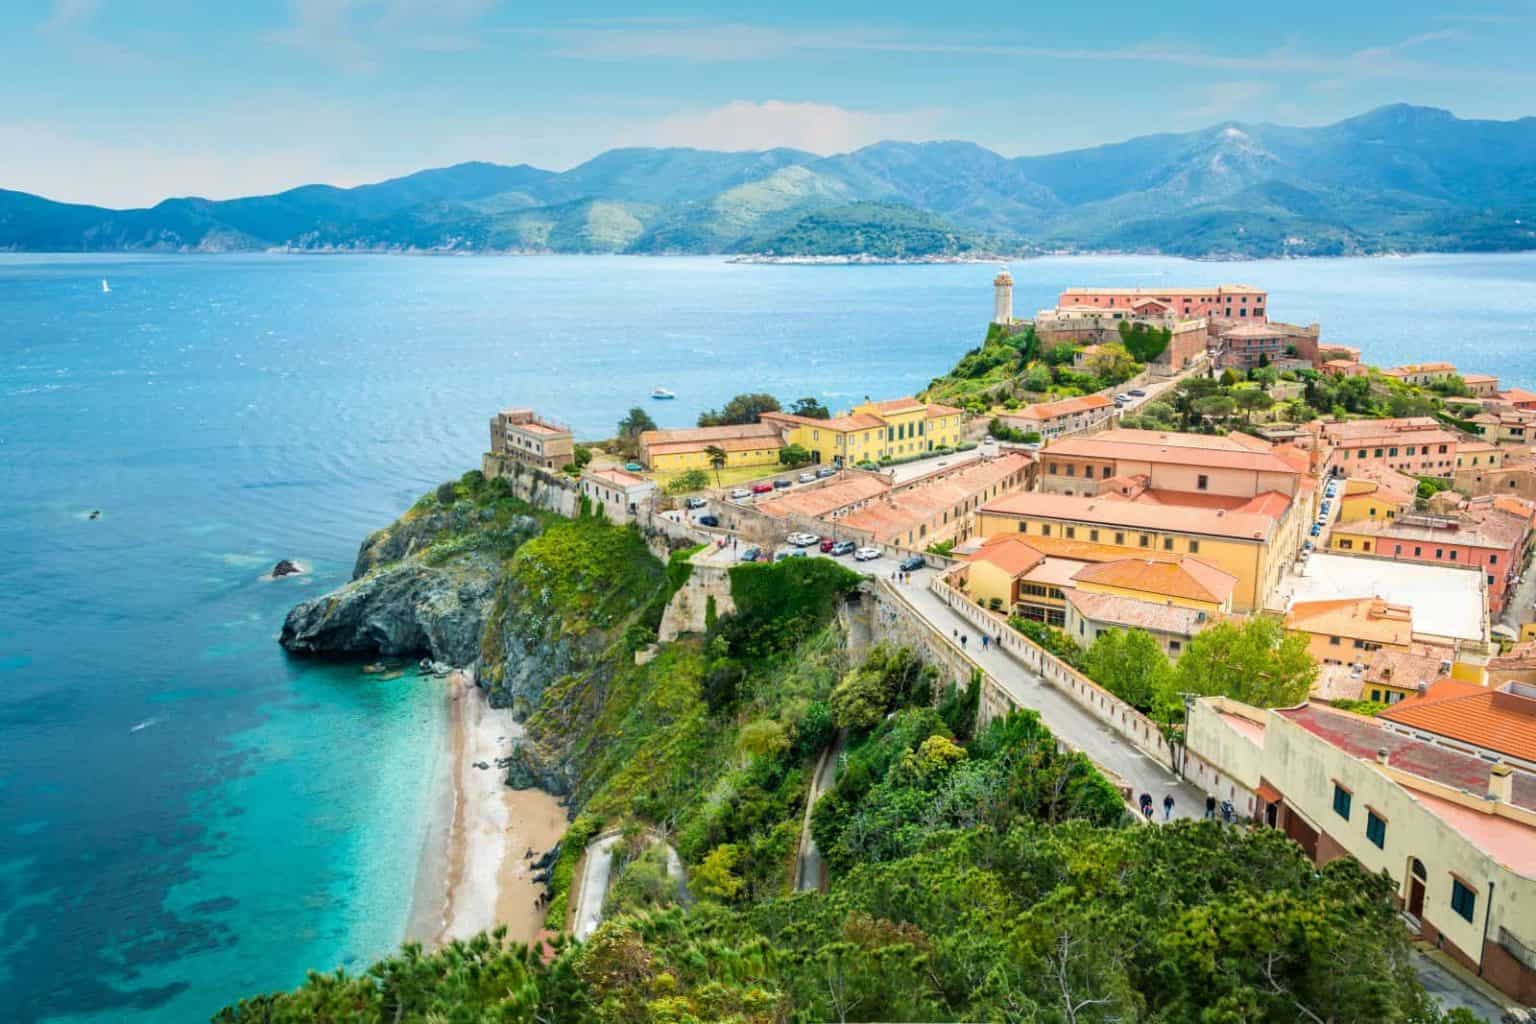 These are the most beautiful places on the island of Elba